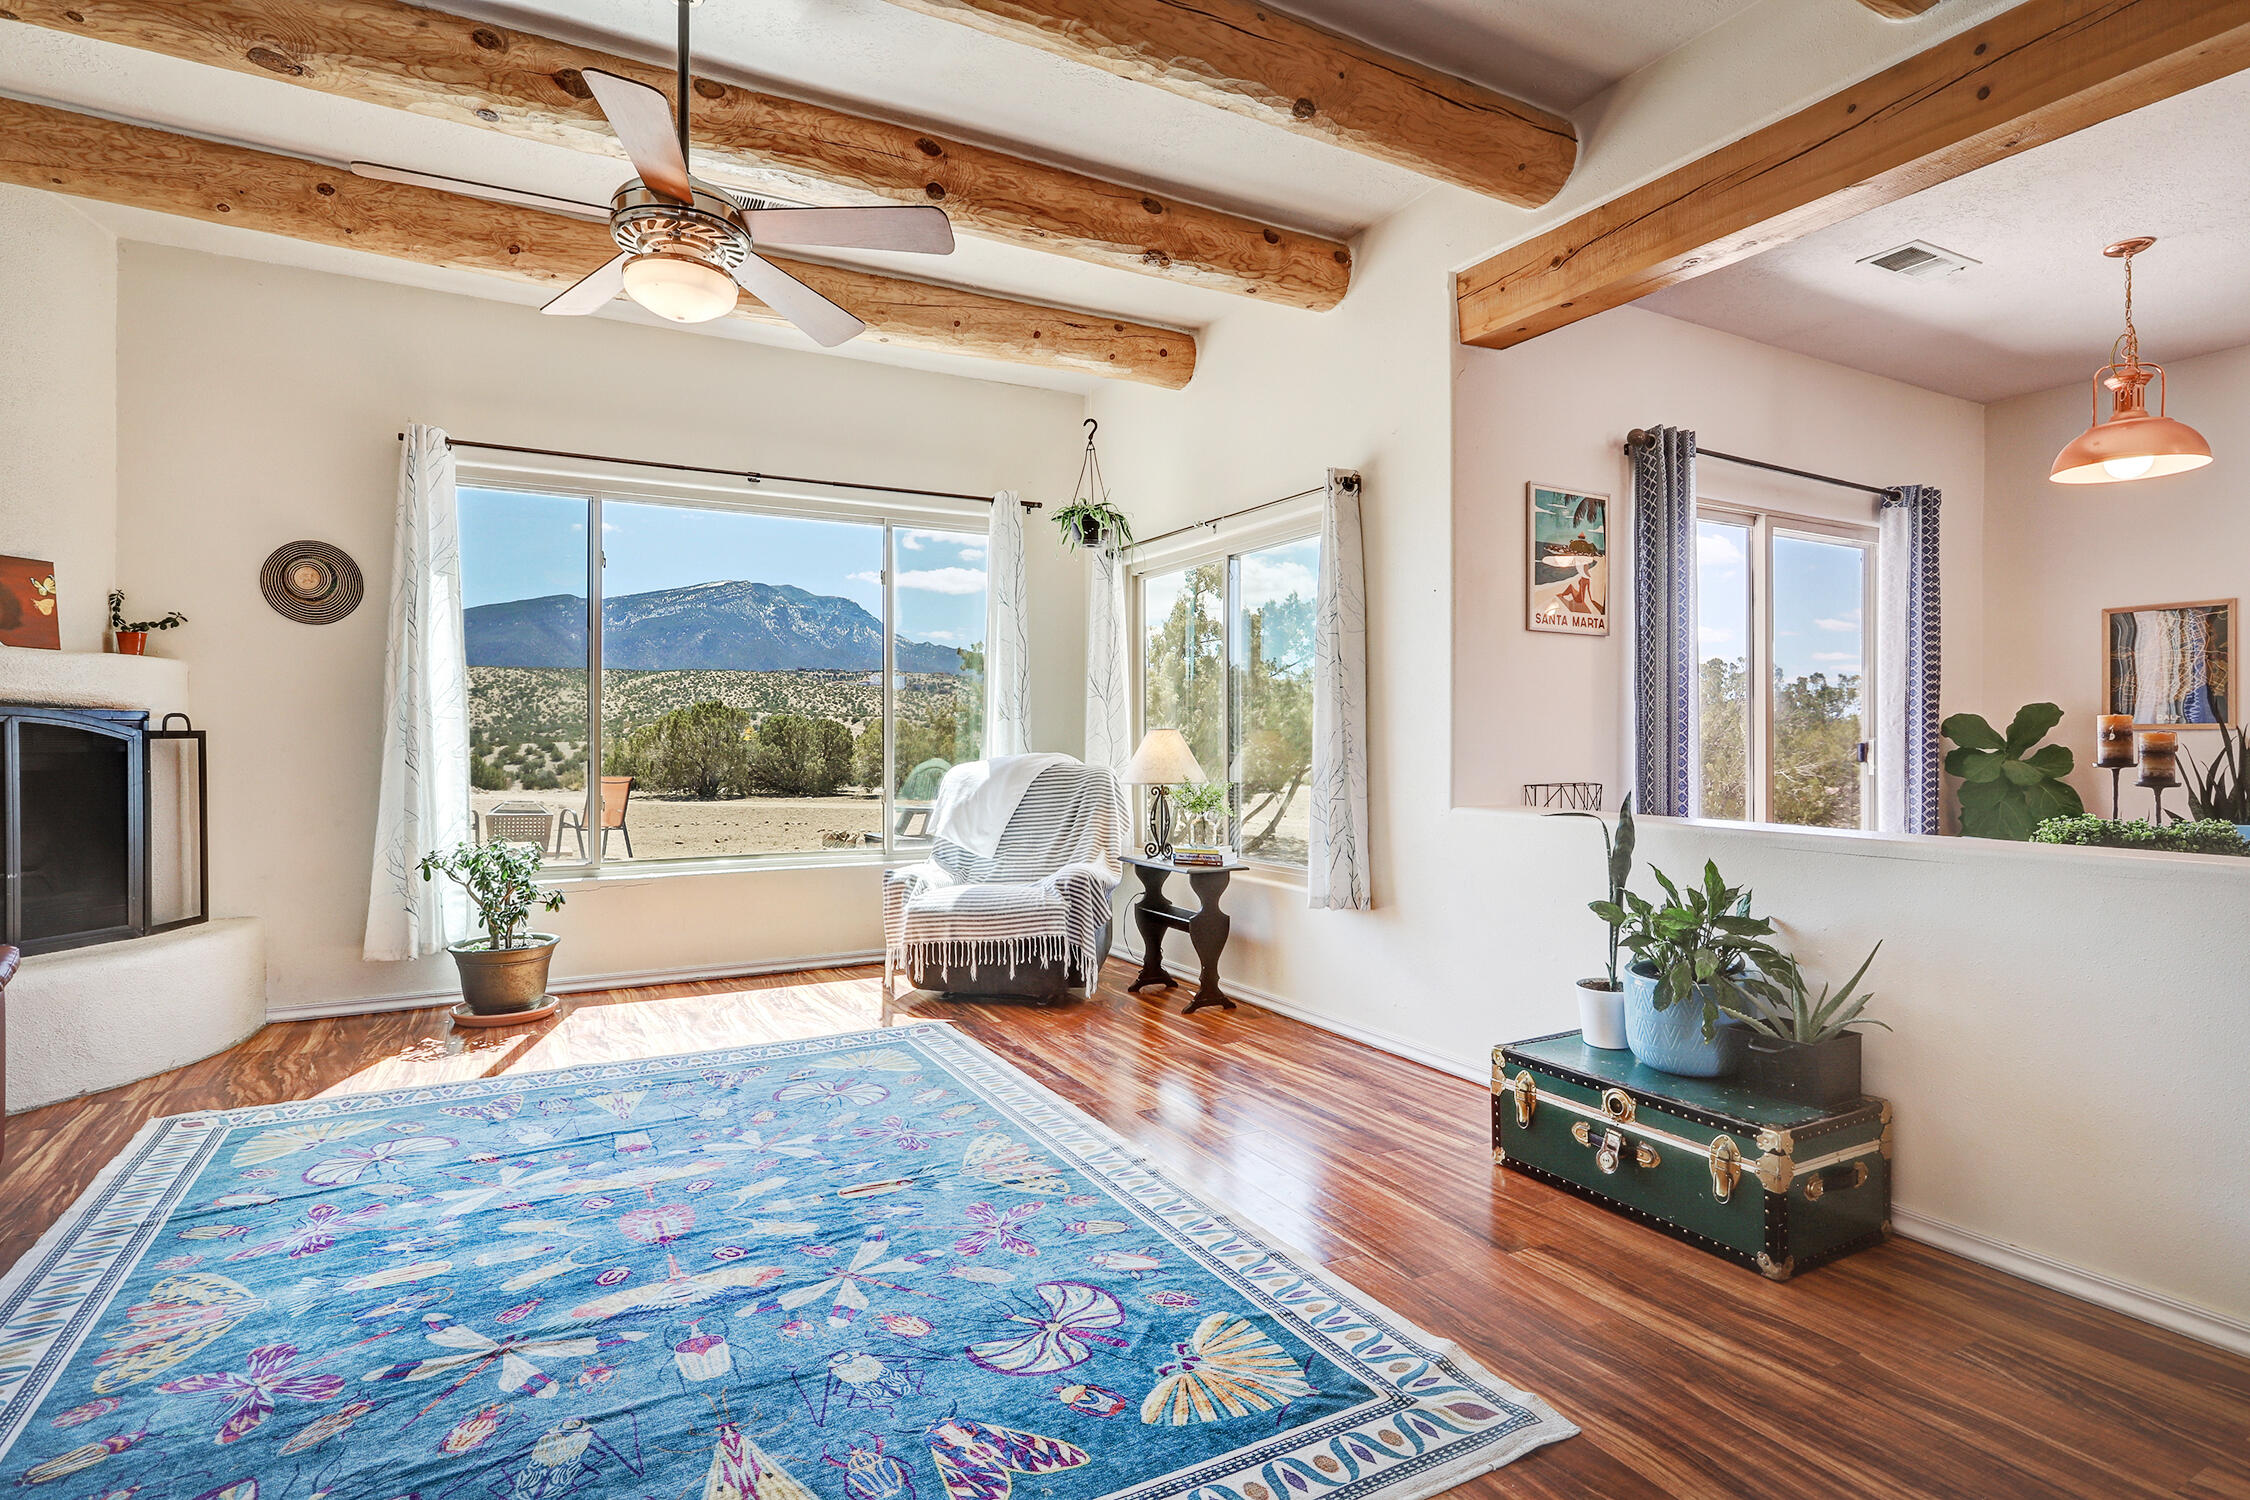 159 Windmill Trail, Placitas, New Mexico 87043, 3 Bedrooms Bedrooms, ,2 BathroomsBathrooms,Residential,For Sale,159 Windmill Trail,1060718